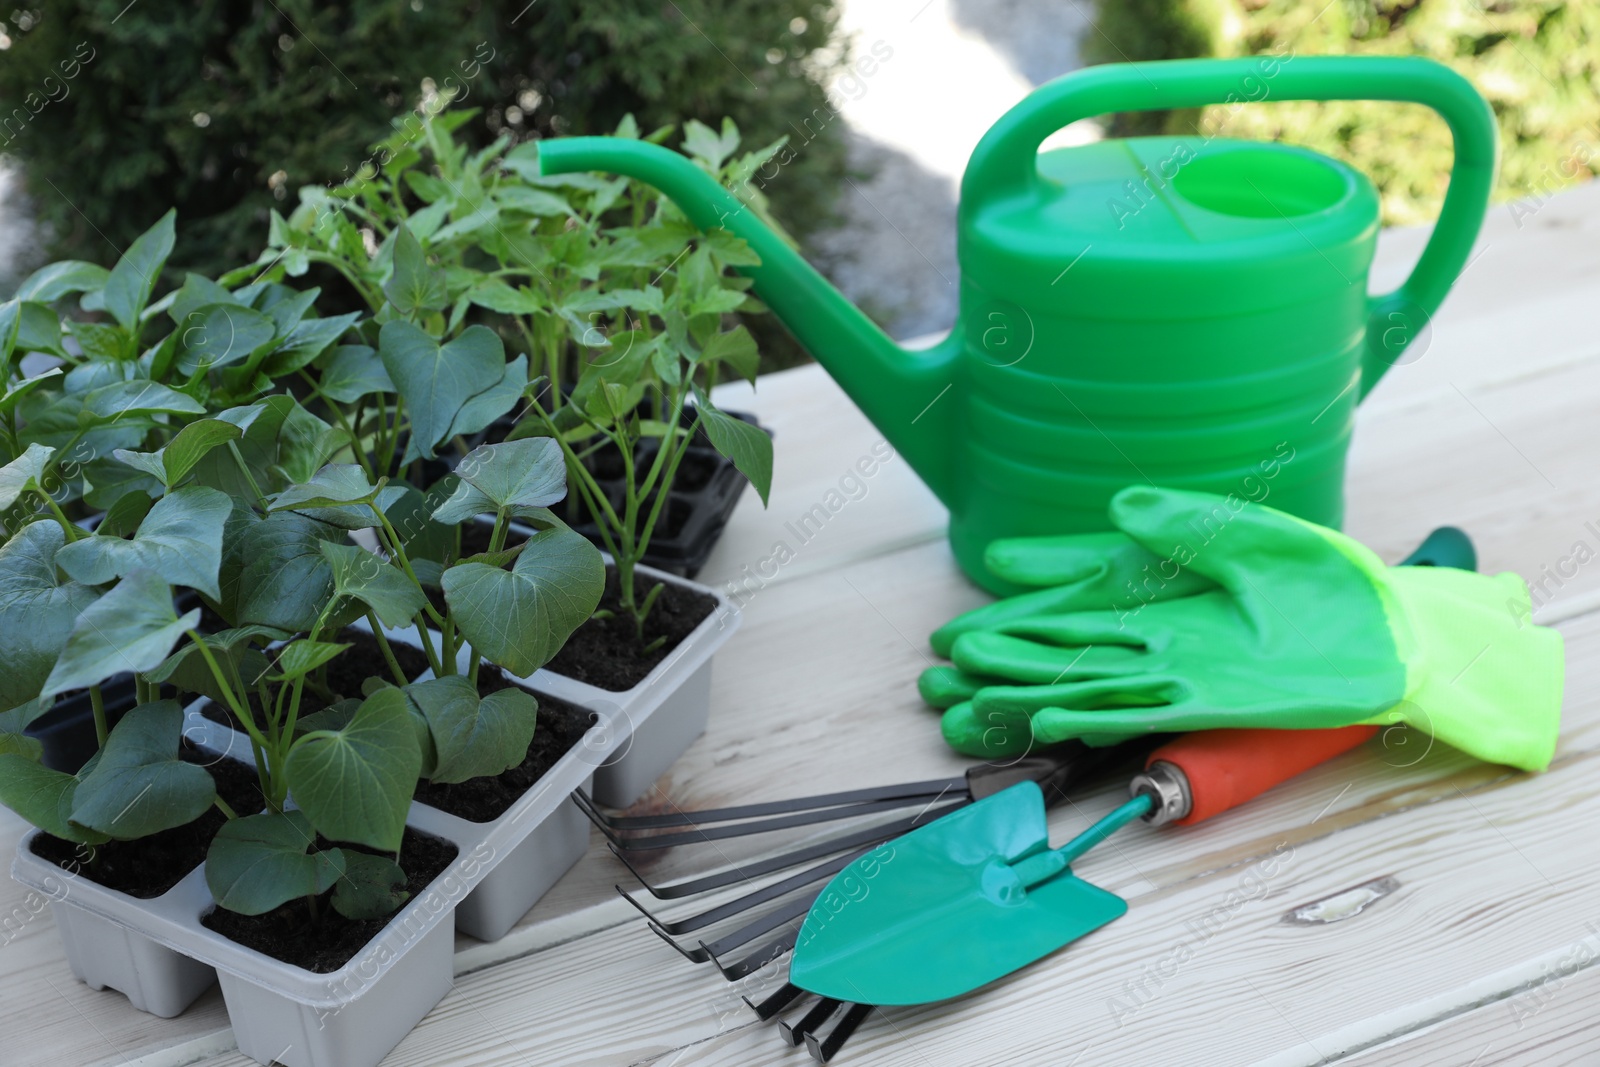 Photo of Seedlings growing in plastic containers with soil, gardening tools, rubber gloves and watering can on wooden table outdoors